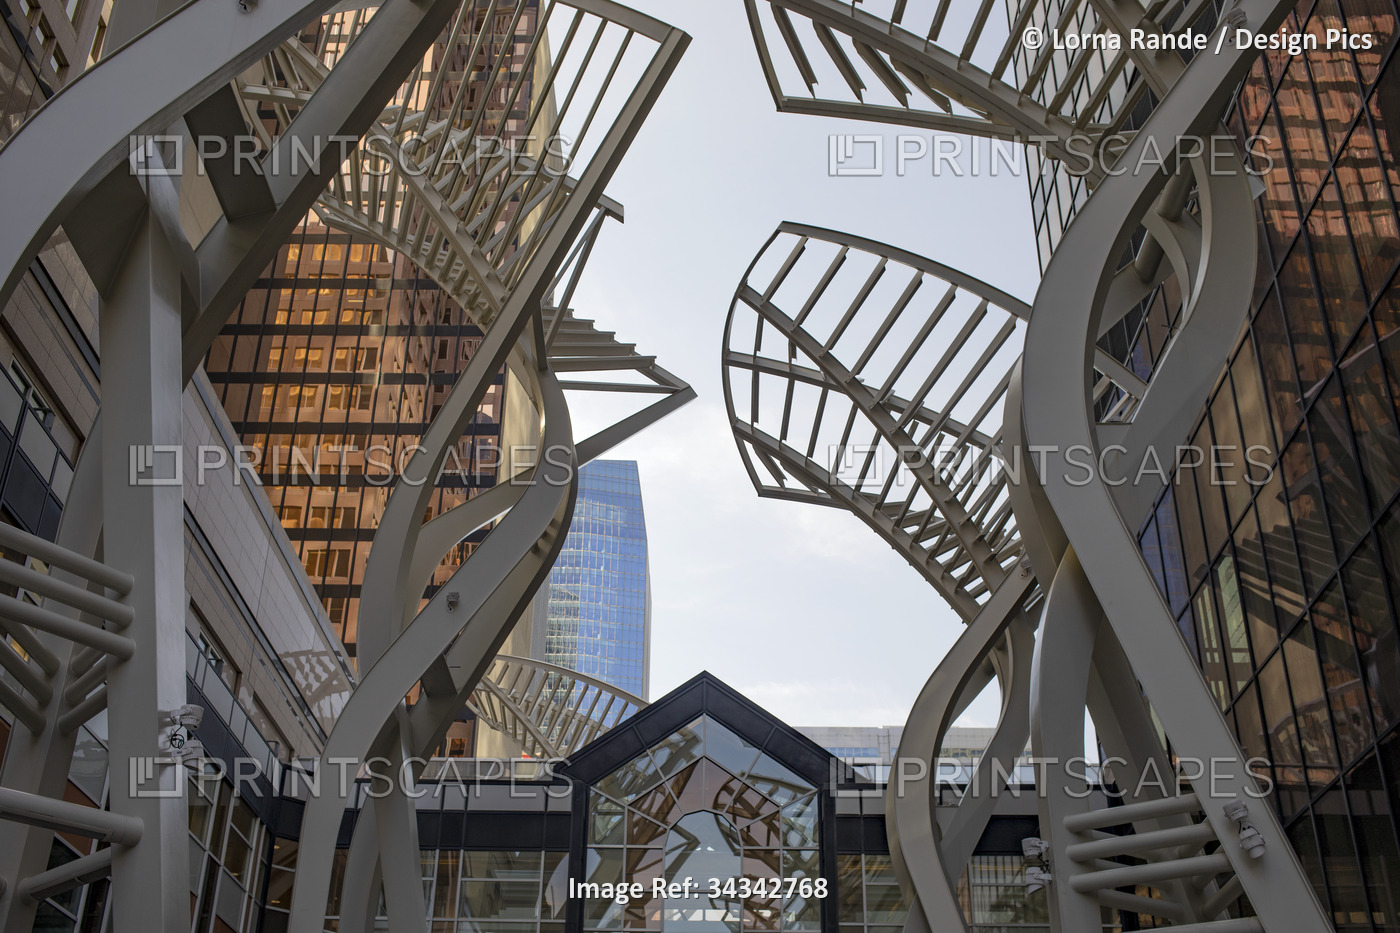 Low angle view of public art sculptures made of metal, and skyscrapers in the ...